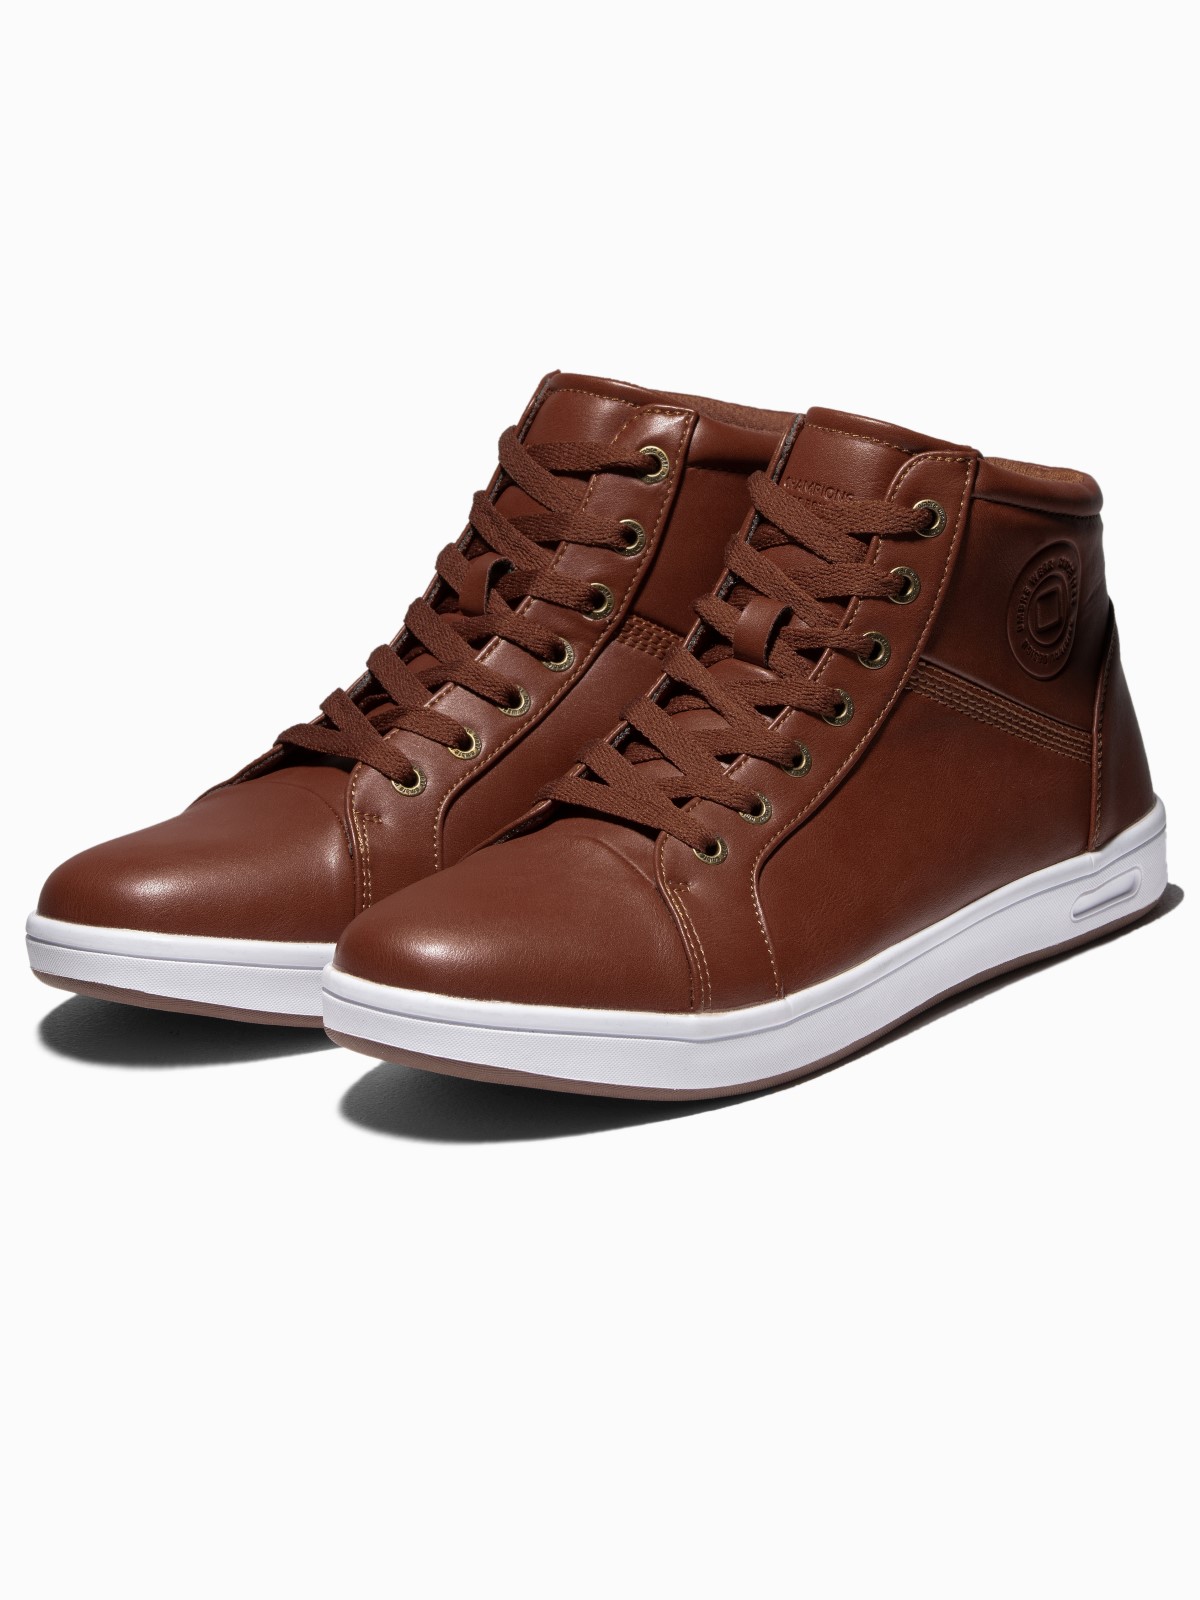 Men's ankle shoes T328 - brown | MODONE 